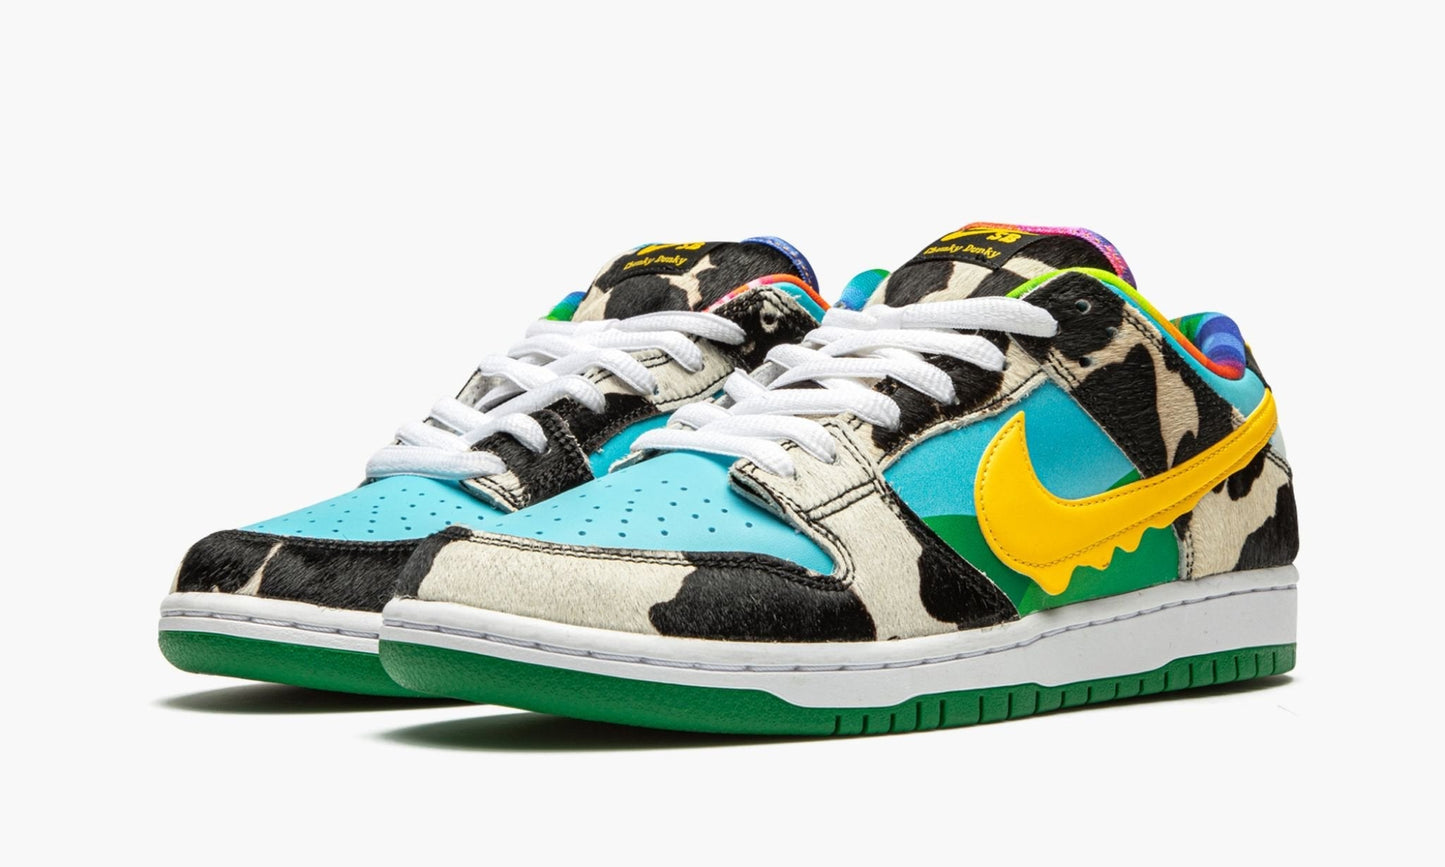 SB Dunk Low "Ben & Jerry's - Chunky Dunky"